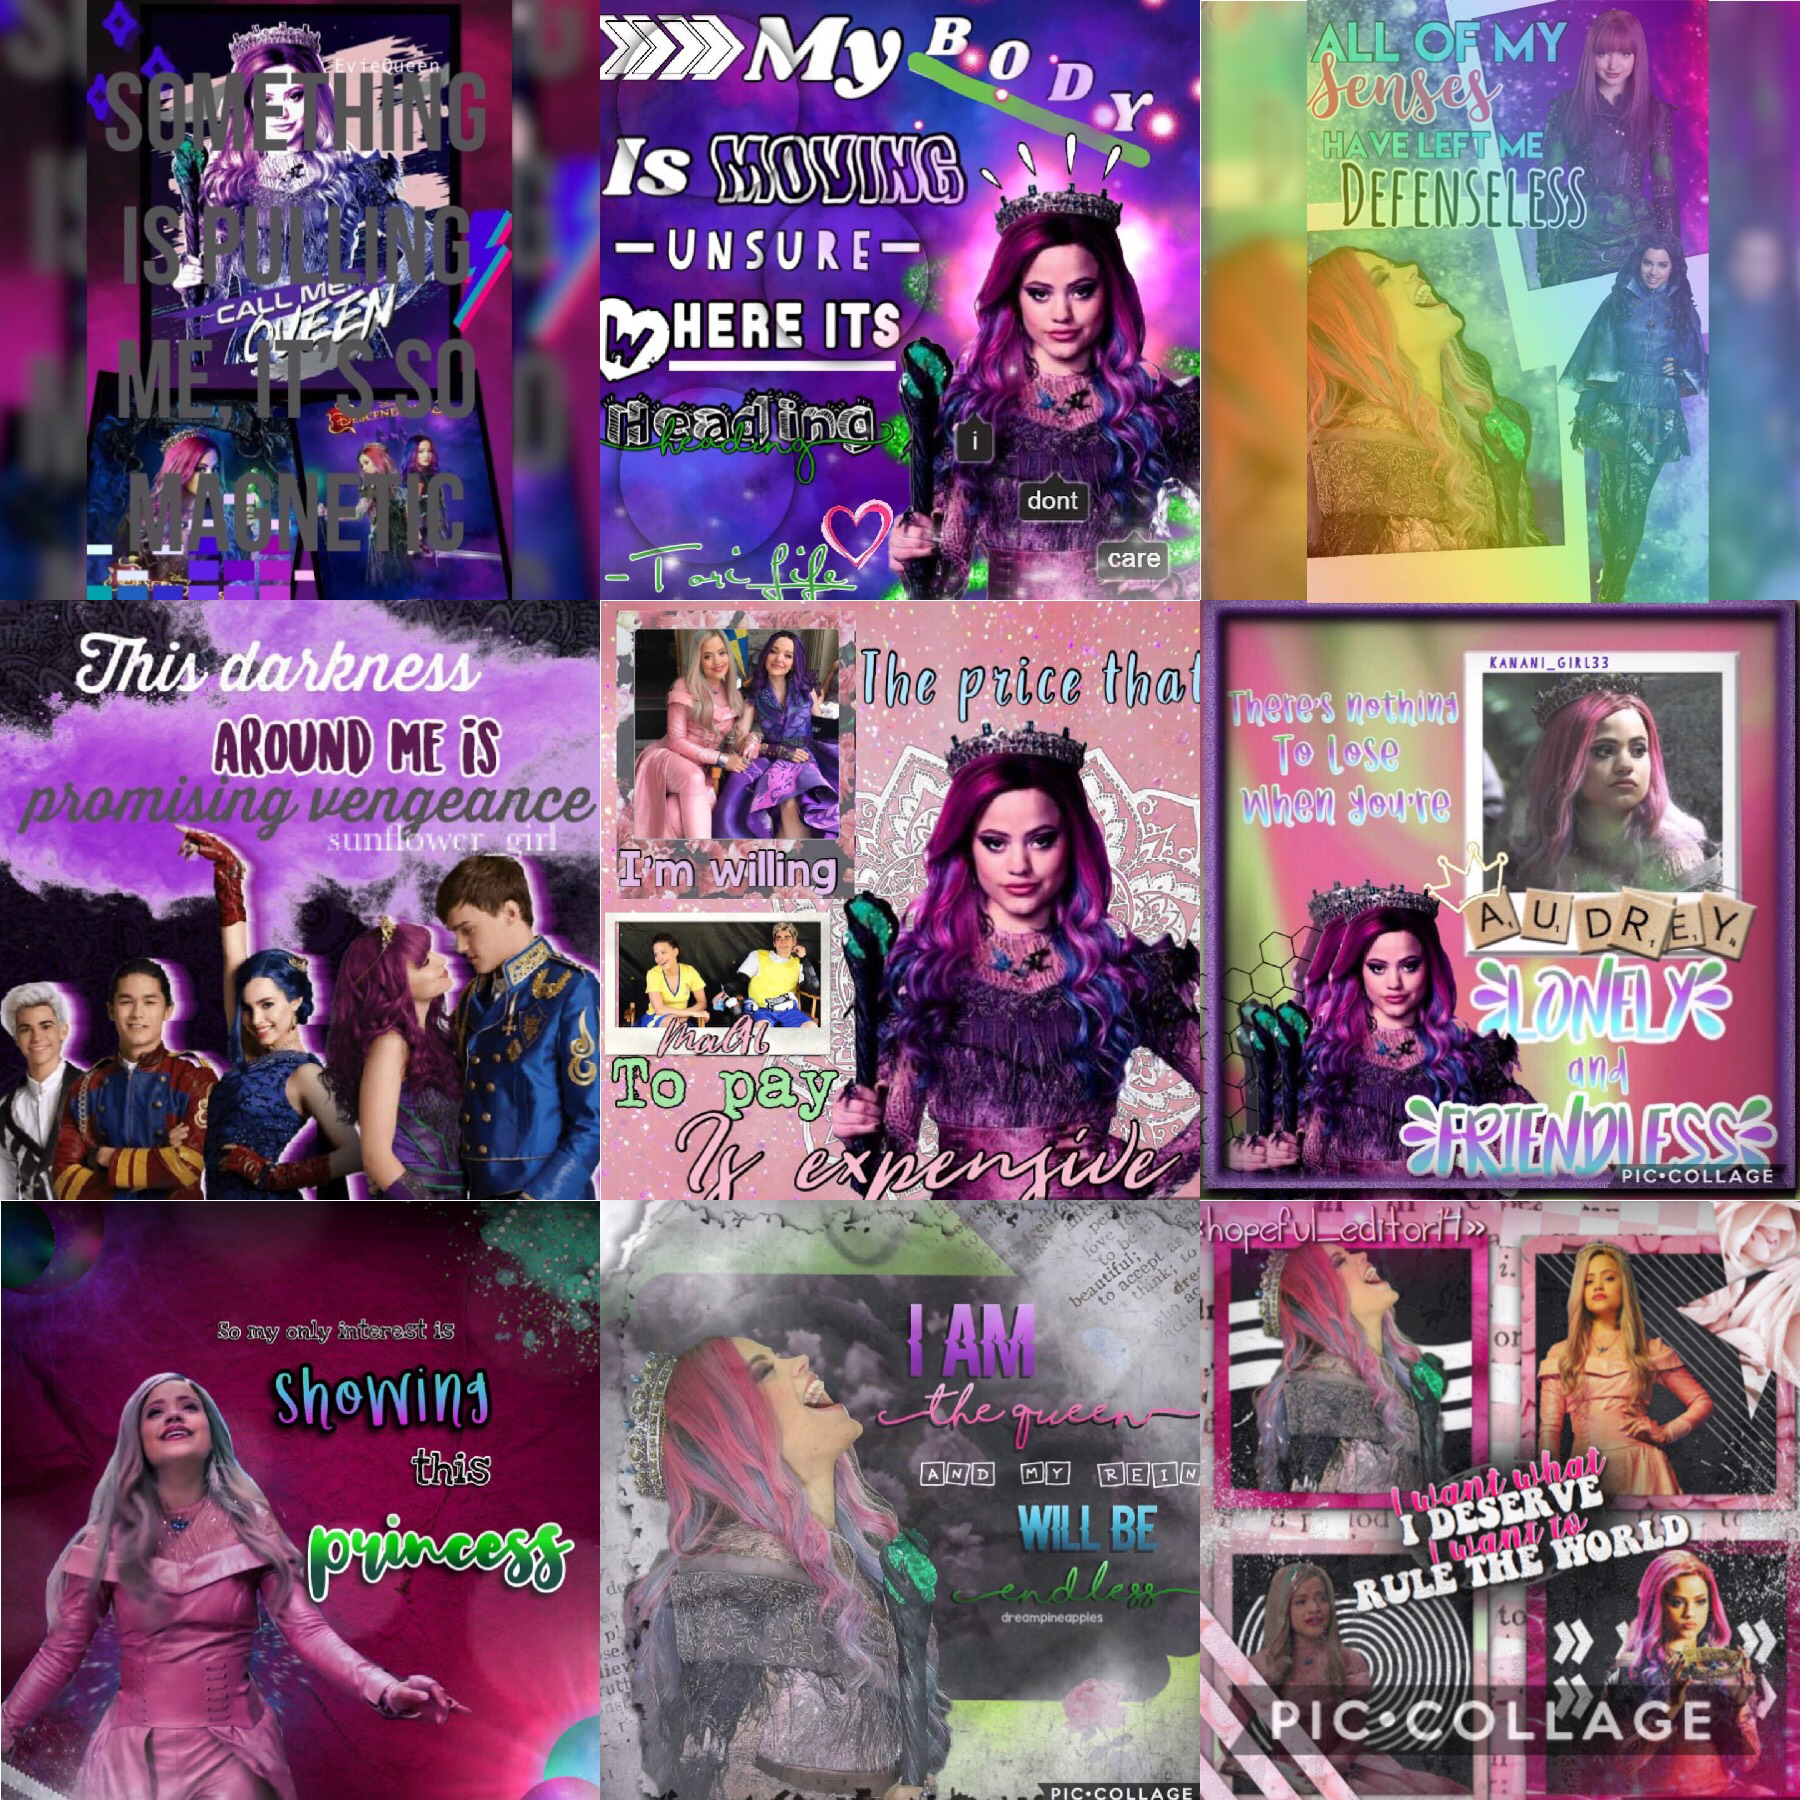 Here’s the mega collab!!
Collage by (starting top left) EvieQueen, Tori_Life, girlandheroutfits, suflower-girl, Mal45, Kanani_girl33, The_Divergent-Tribute, DreamPineapples, and finally, me!